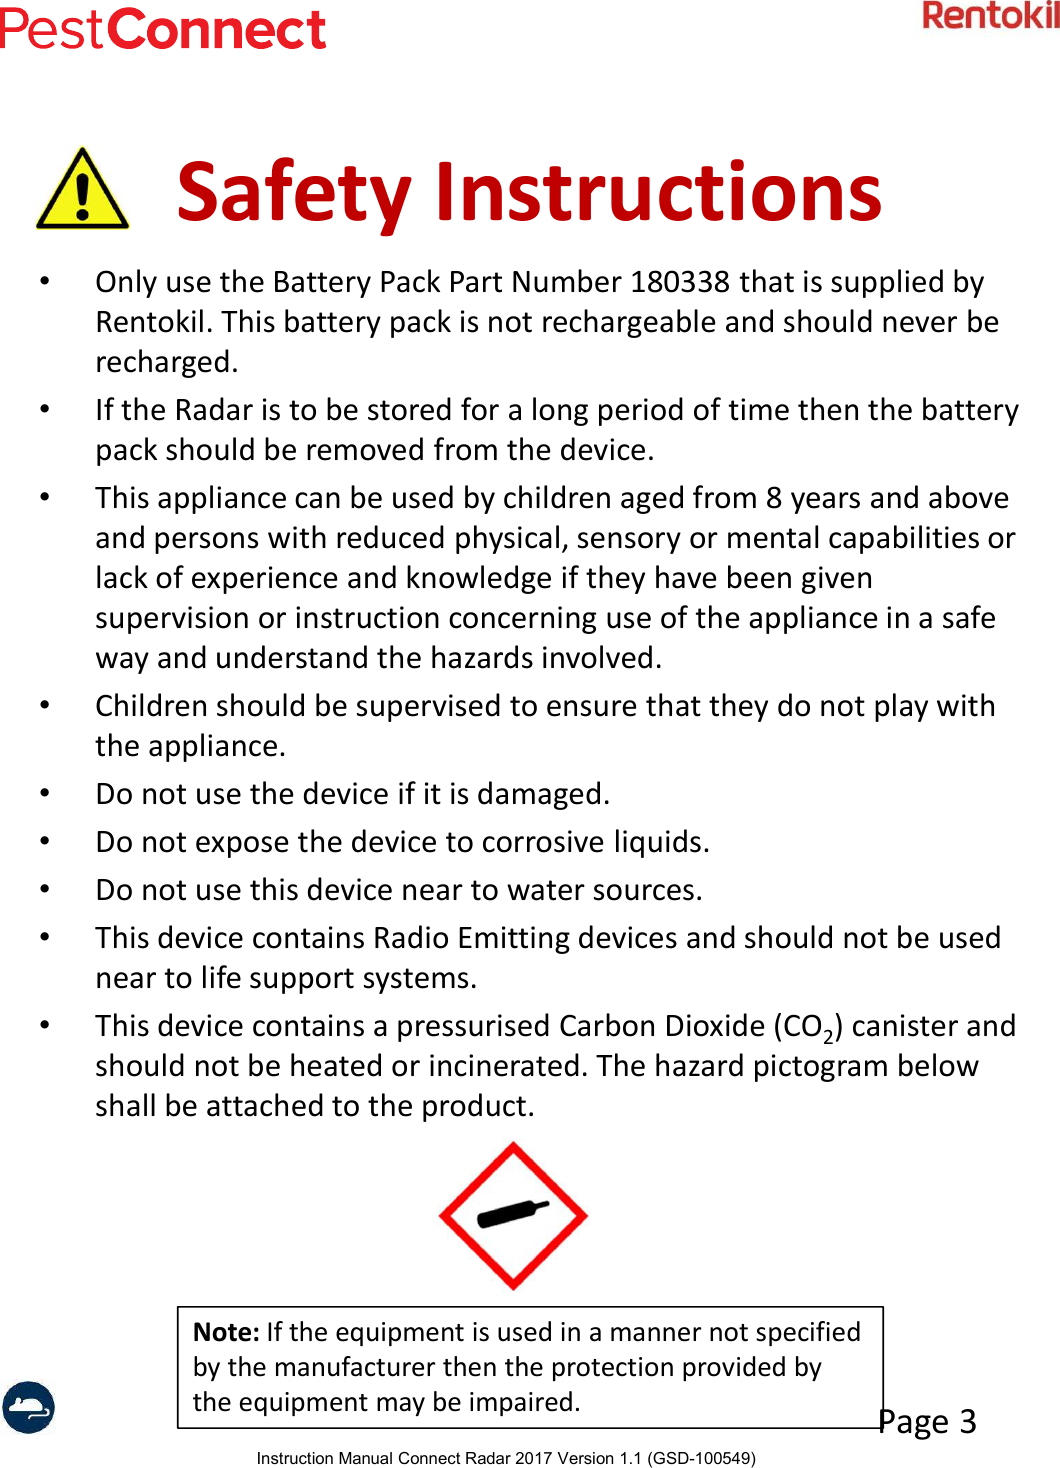 Instruction Manual Connect Radar 2017 Version 1.1 (GSD-100549)Page 3Safety Instructions•Only use the Battery Pack Part Number 180338 that is supplied by Rentokil. This battery pack is not rechargeable and should never be recharged.•If the Radar is to be stored for a long period of time then the battery pack should be removed from the device.•This appliance can be used by children aged from 8 years and above and persons with reduced physical, sensory or mental capabilities or lack of experience and knowledge if they have been given supervision or instruction concerning use of the appliance in a safe way and understand the hazards involved.•Children should be supervised to ensure that they do not play with the appliance.•Do not use the device if it is damaged.•Do not expose the device to corrosive liquids.•Do not use this device near to water sources.•This device contains Radio Emitting devices and should not be used near to life support systems.•This device contains a pressurised Carbon Dioxide (CO2) canister and should not be heated or incinerated. The hazard pictogram below shall be attached to the product.Note: If the equipment is used in a manner not specified by the manufacturer then the protection provided by the equipment may be impaired.